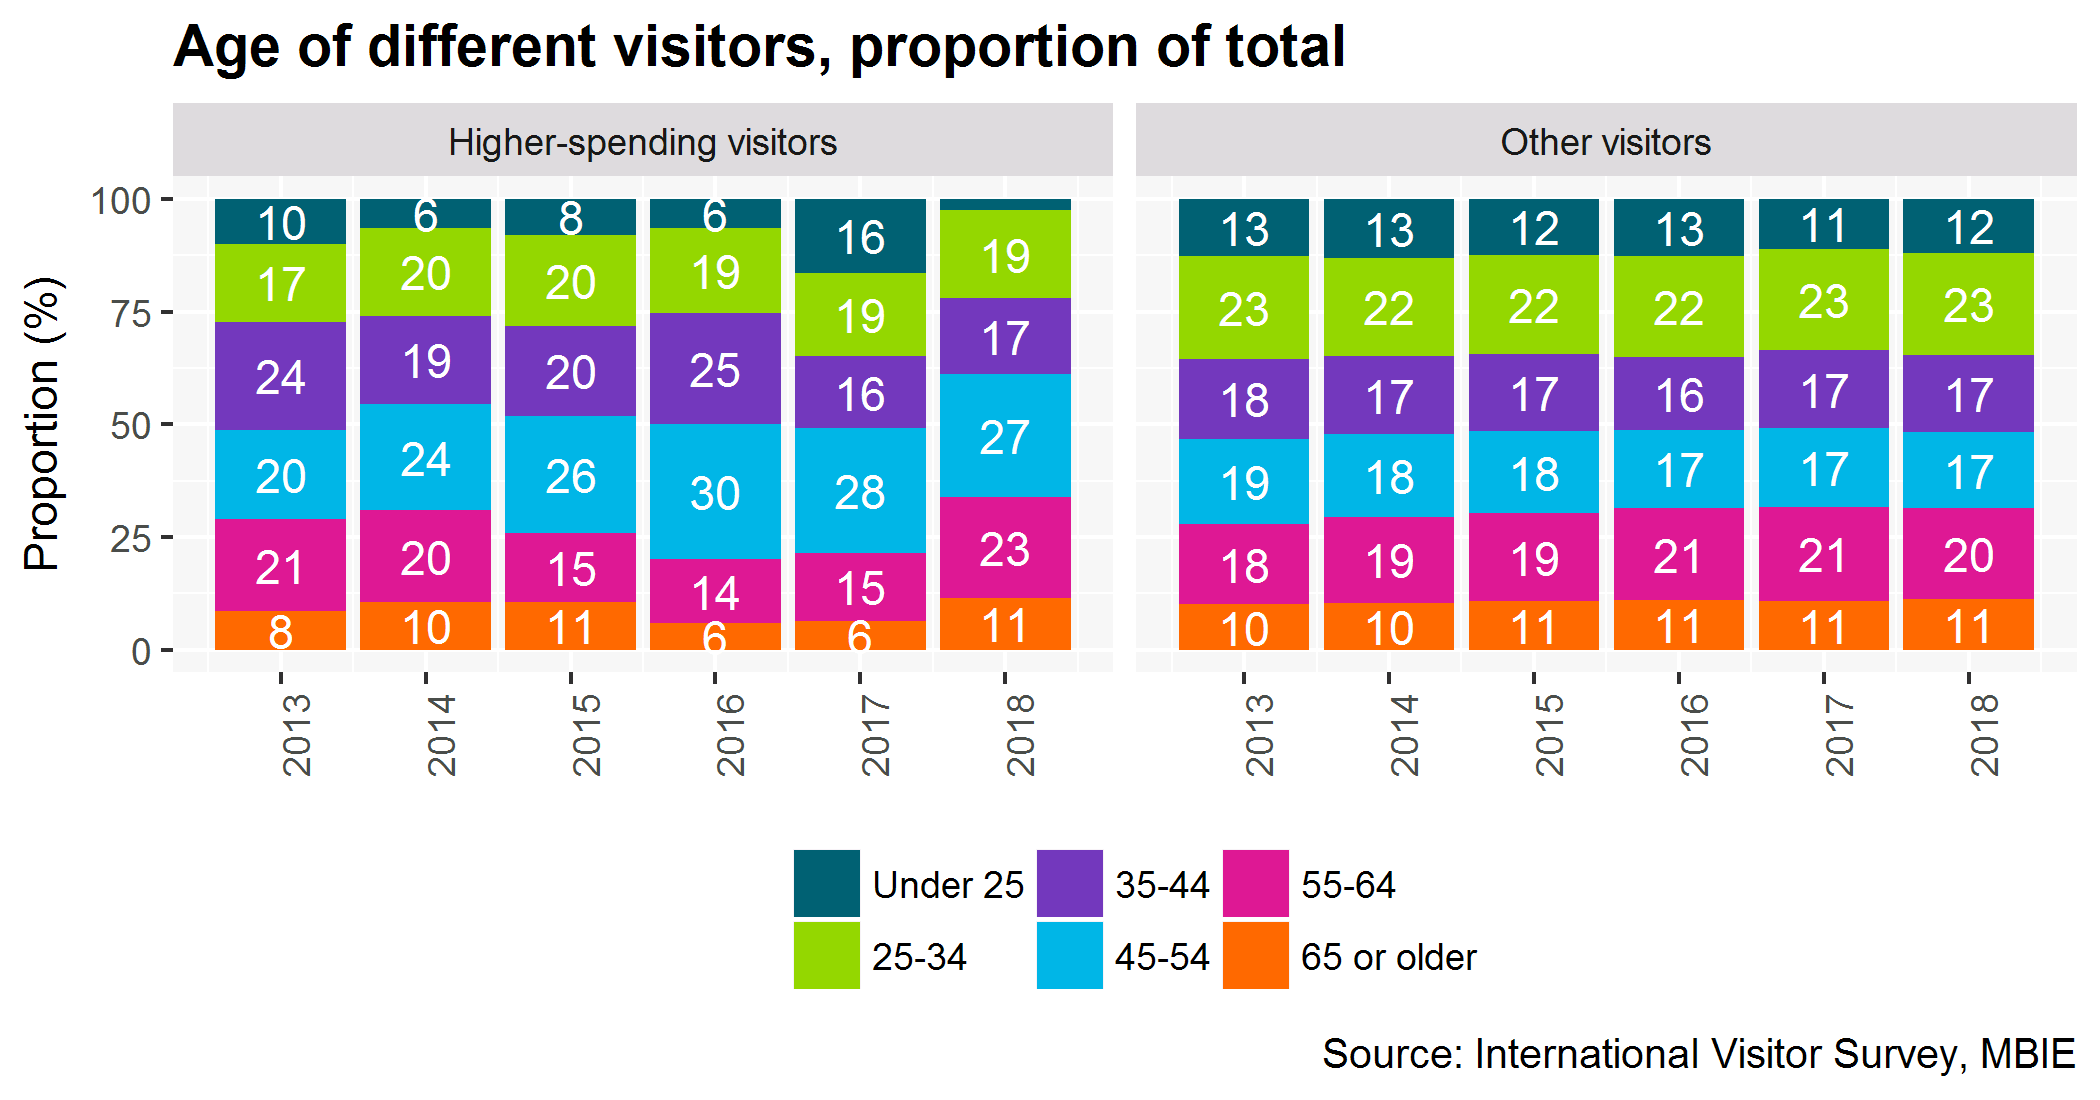 Proportion of visitors by age for higher-spending visitor and others